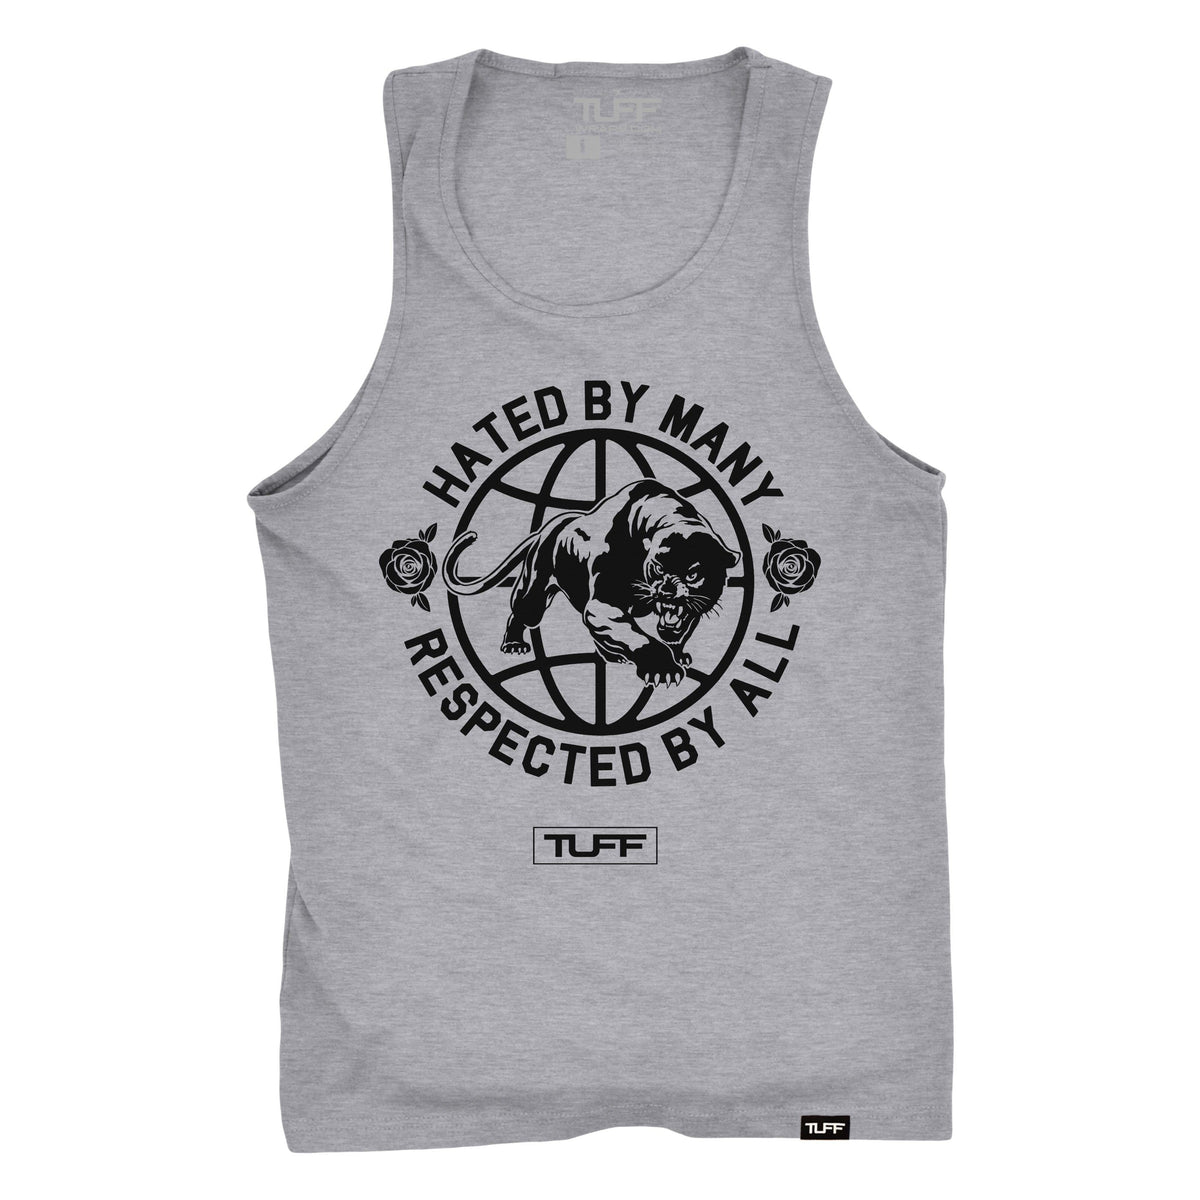 Hated By Many, Respected By All Tank S / Heather Gray TuffWraps.com